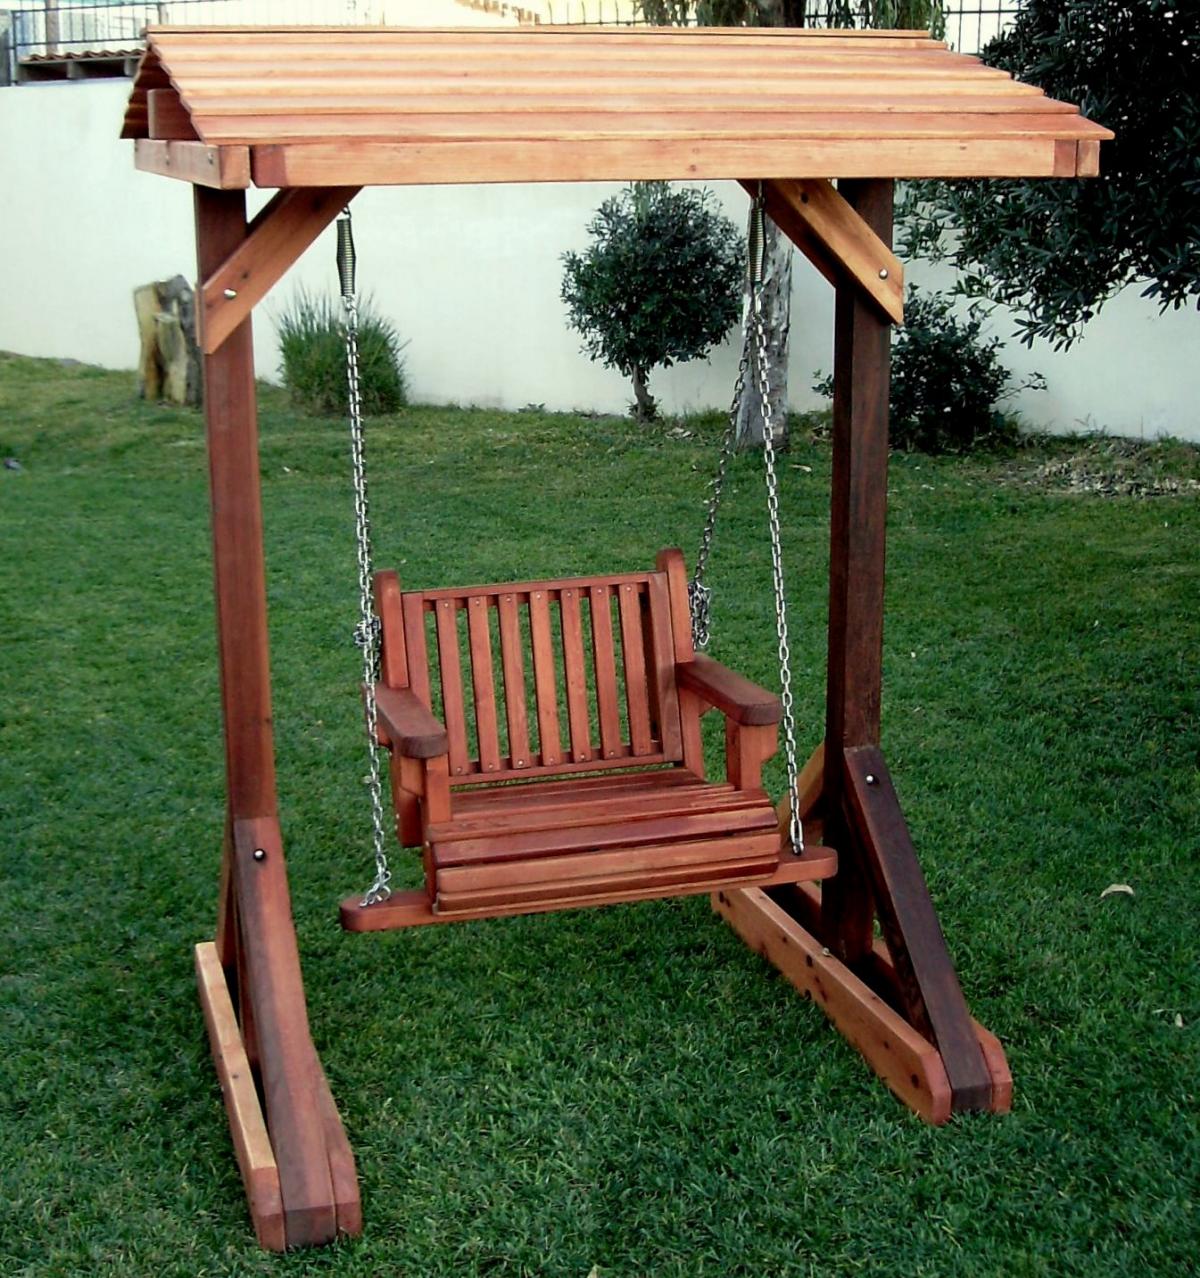 The Chair Swing Sets Built To Last, Outdoor Furniture Swing Set